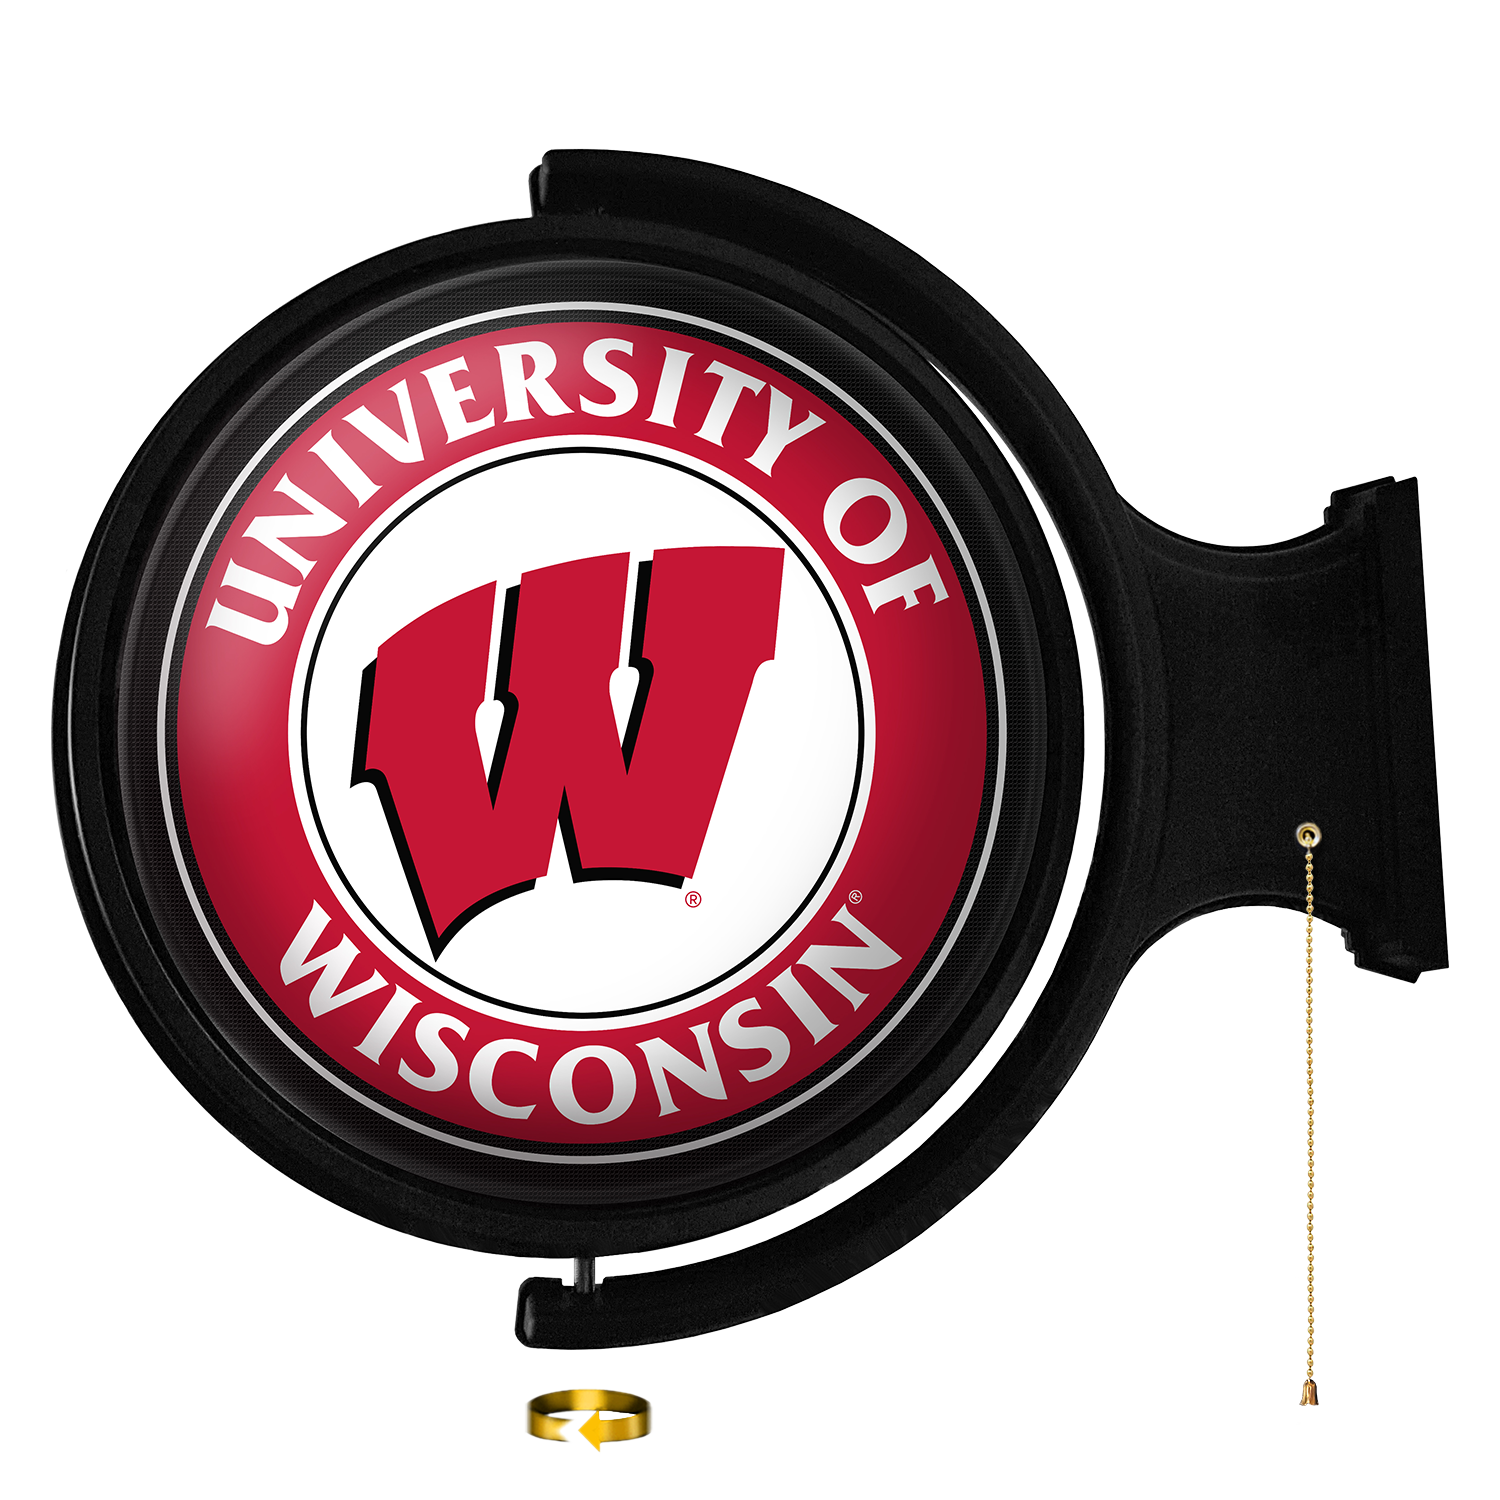 Wisconsin Badgers Round Rotating Wall Sign